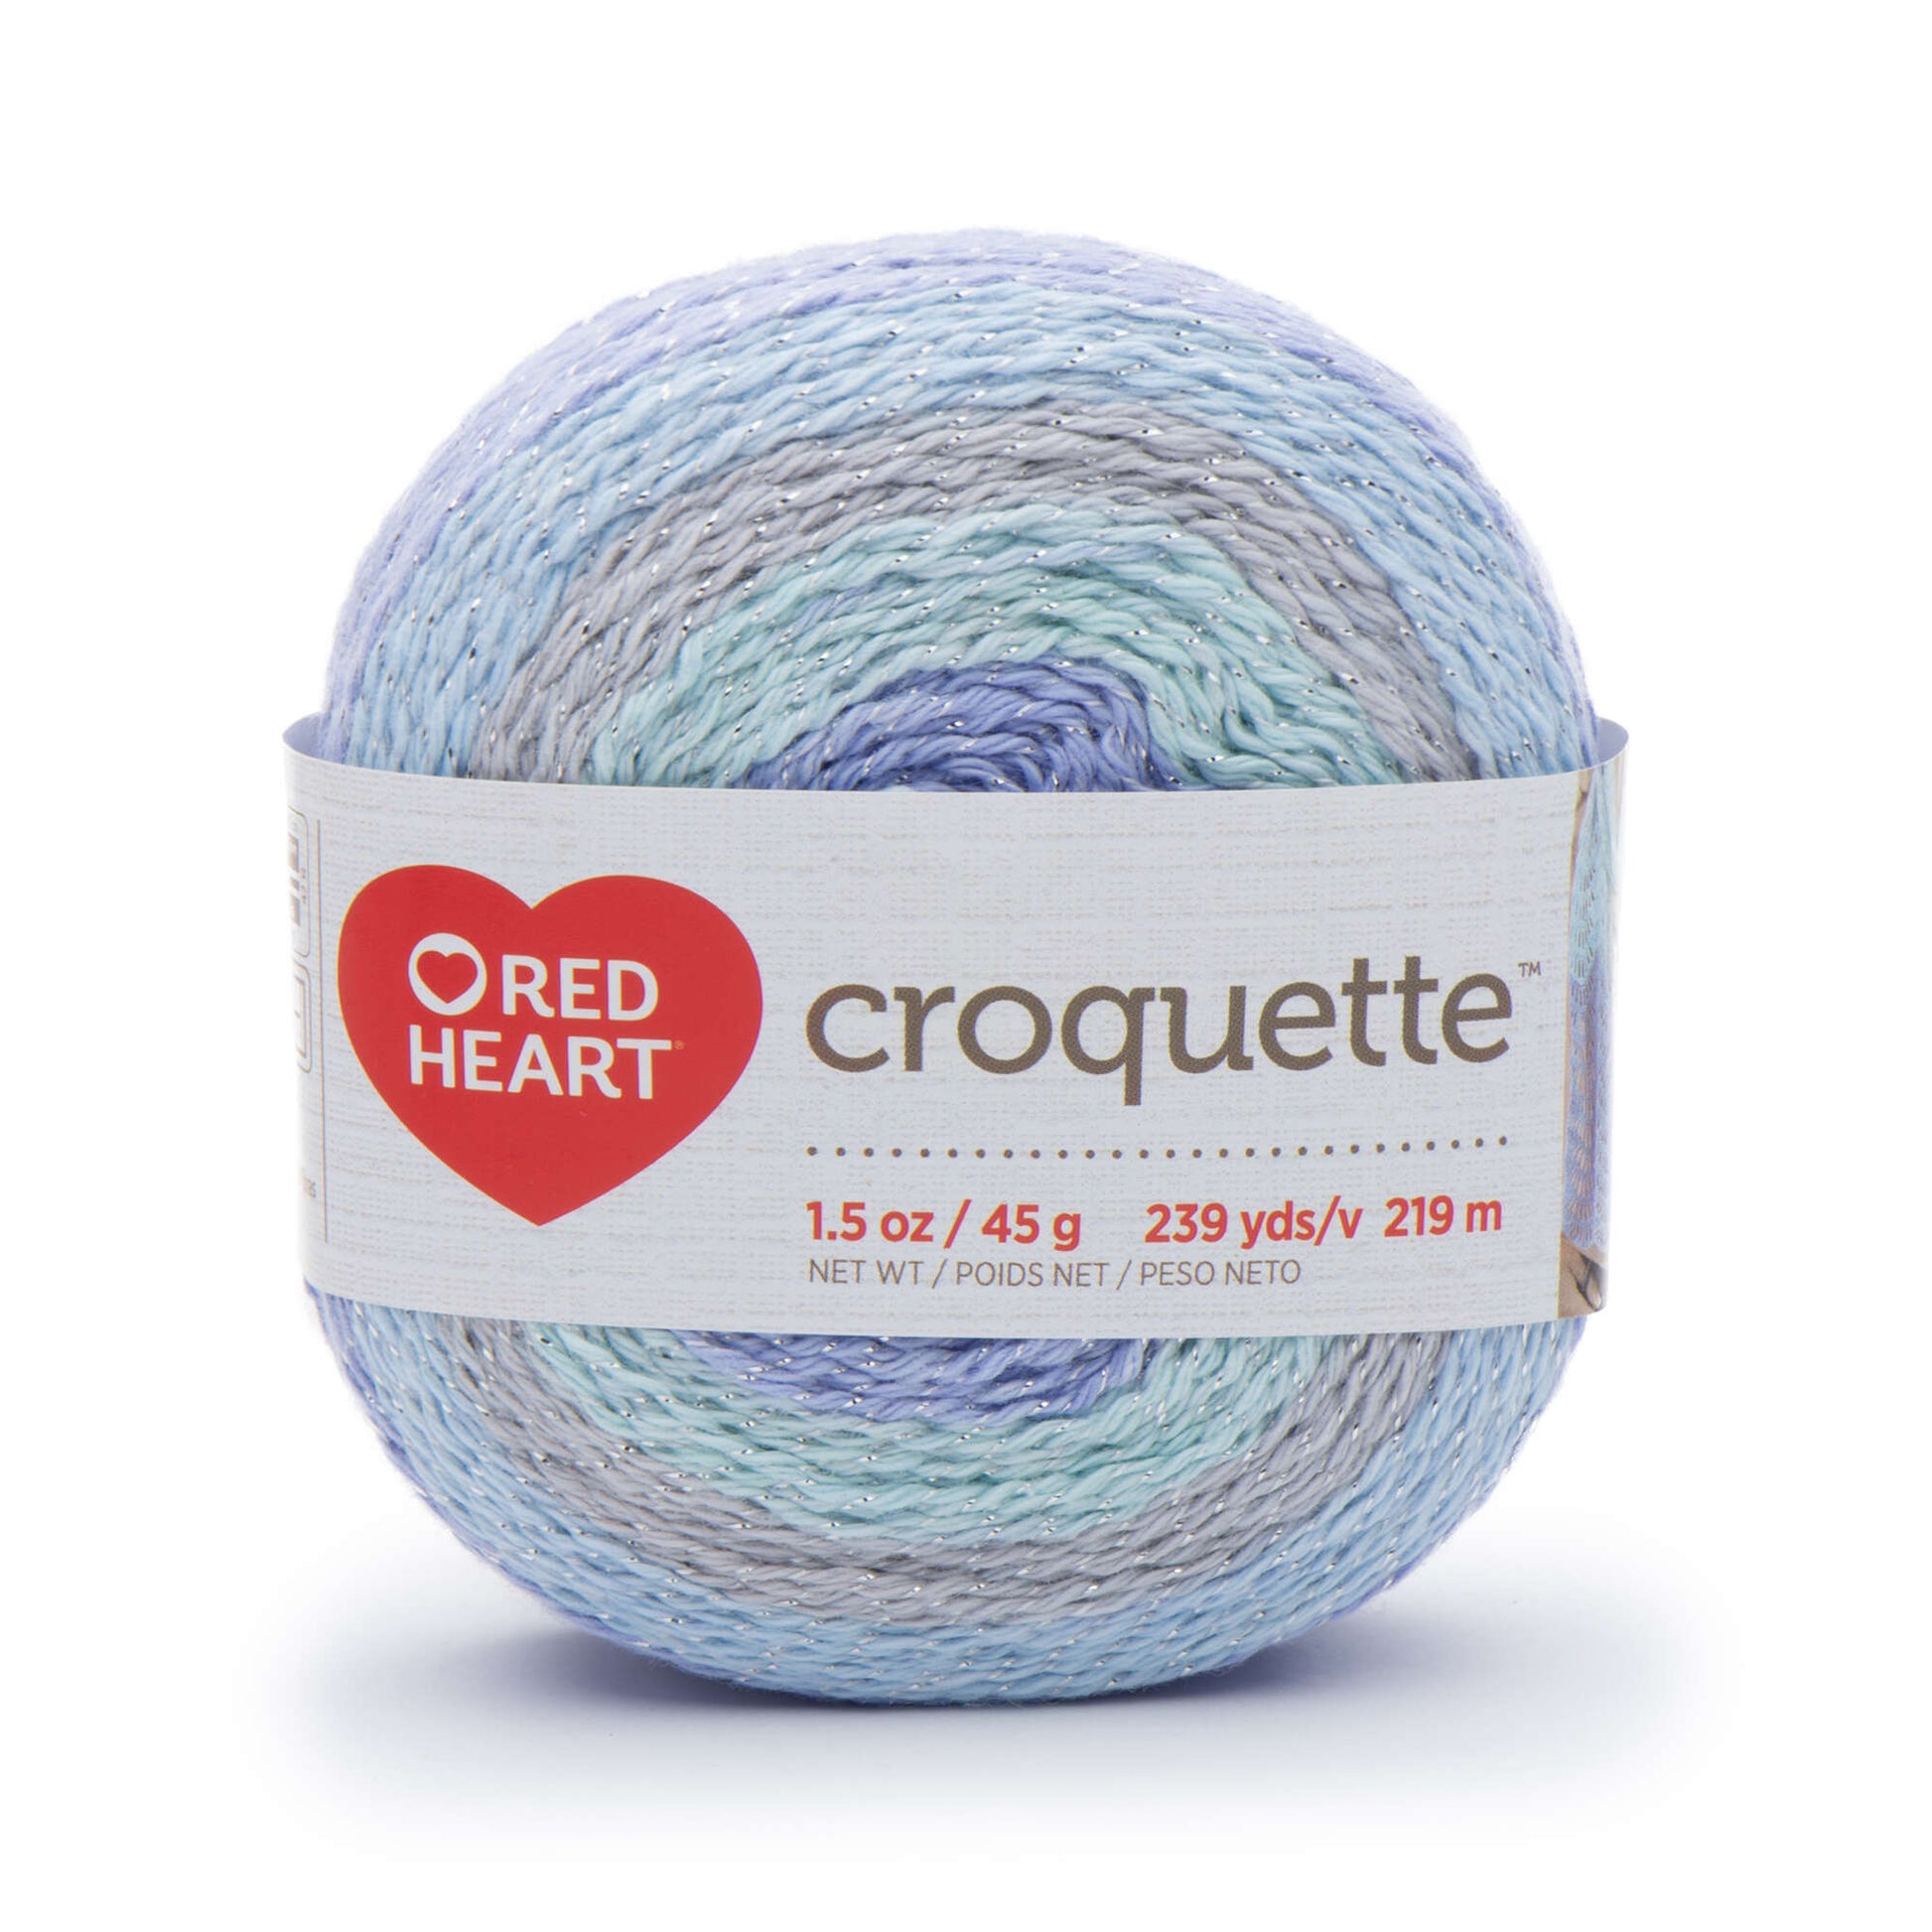 Red Heart Croquette Yarn - Clearance shades Calming